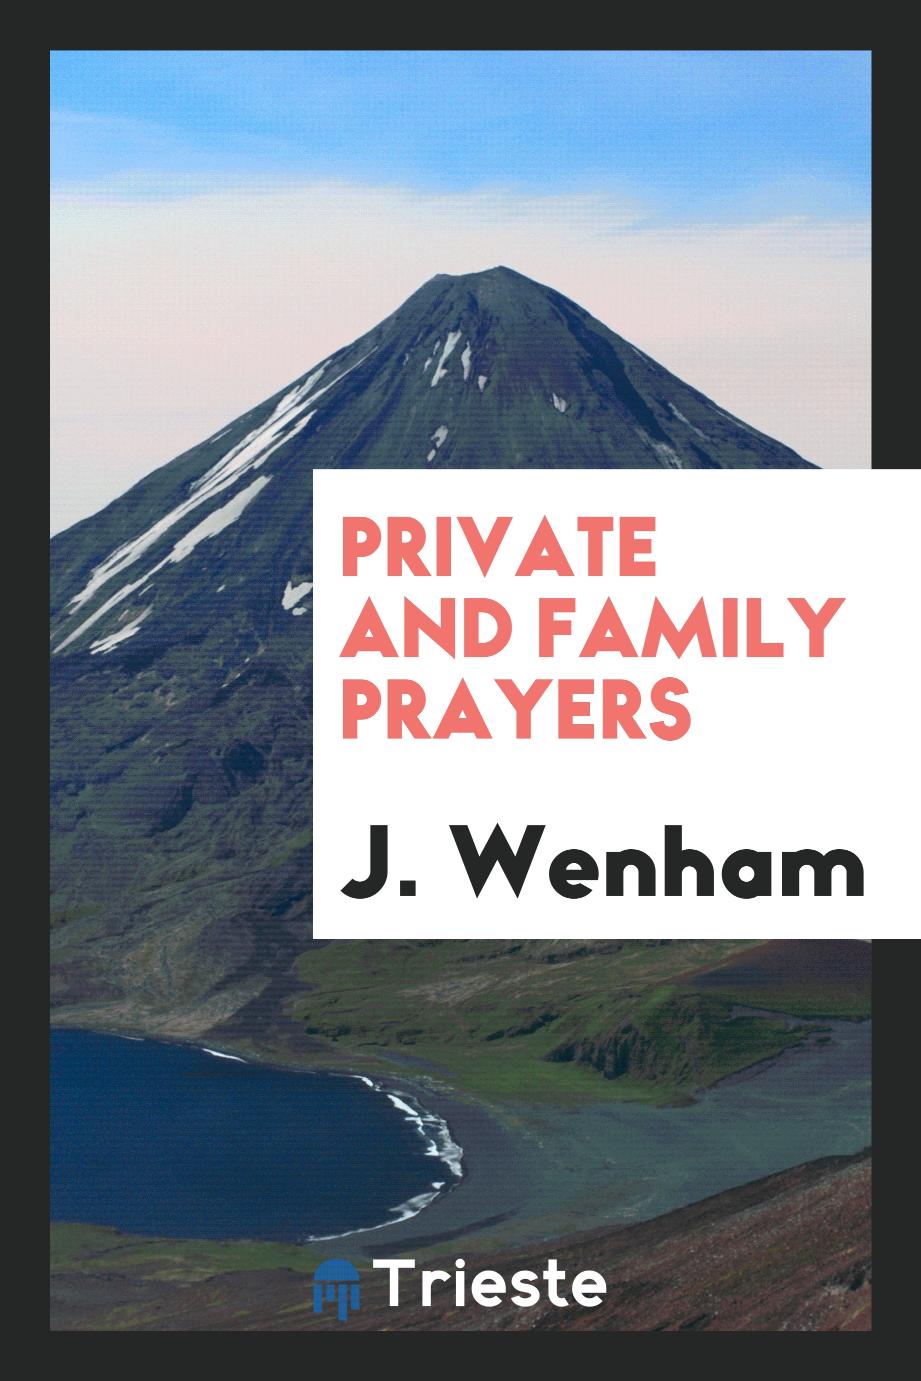 Private and family prayers